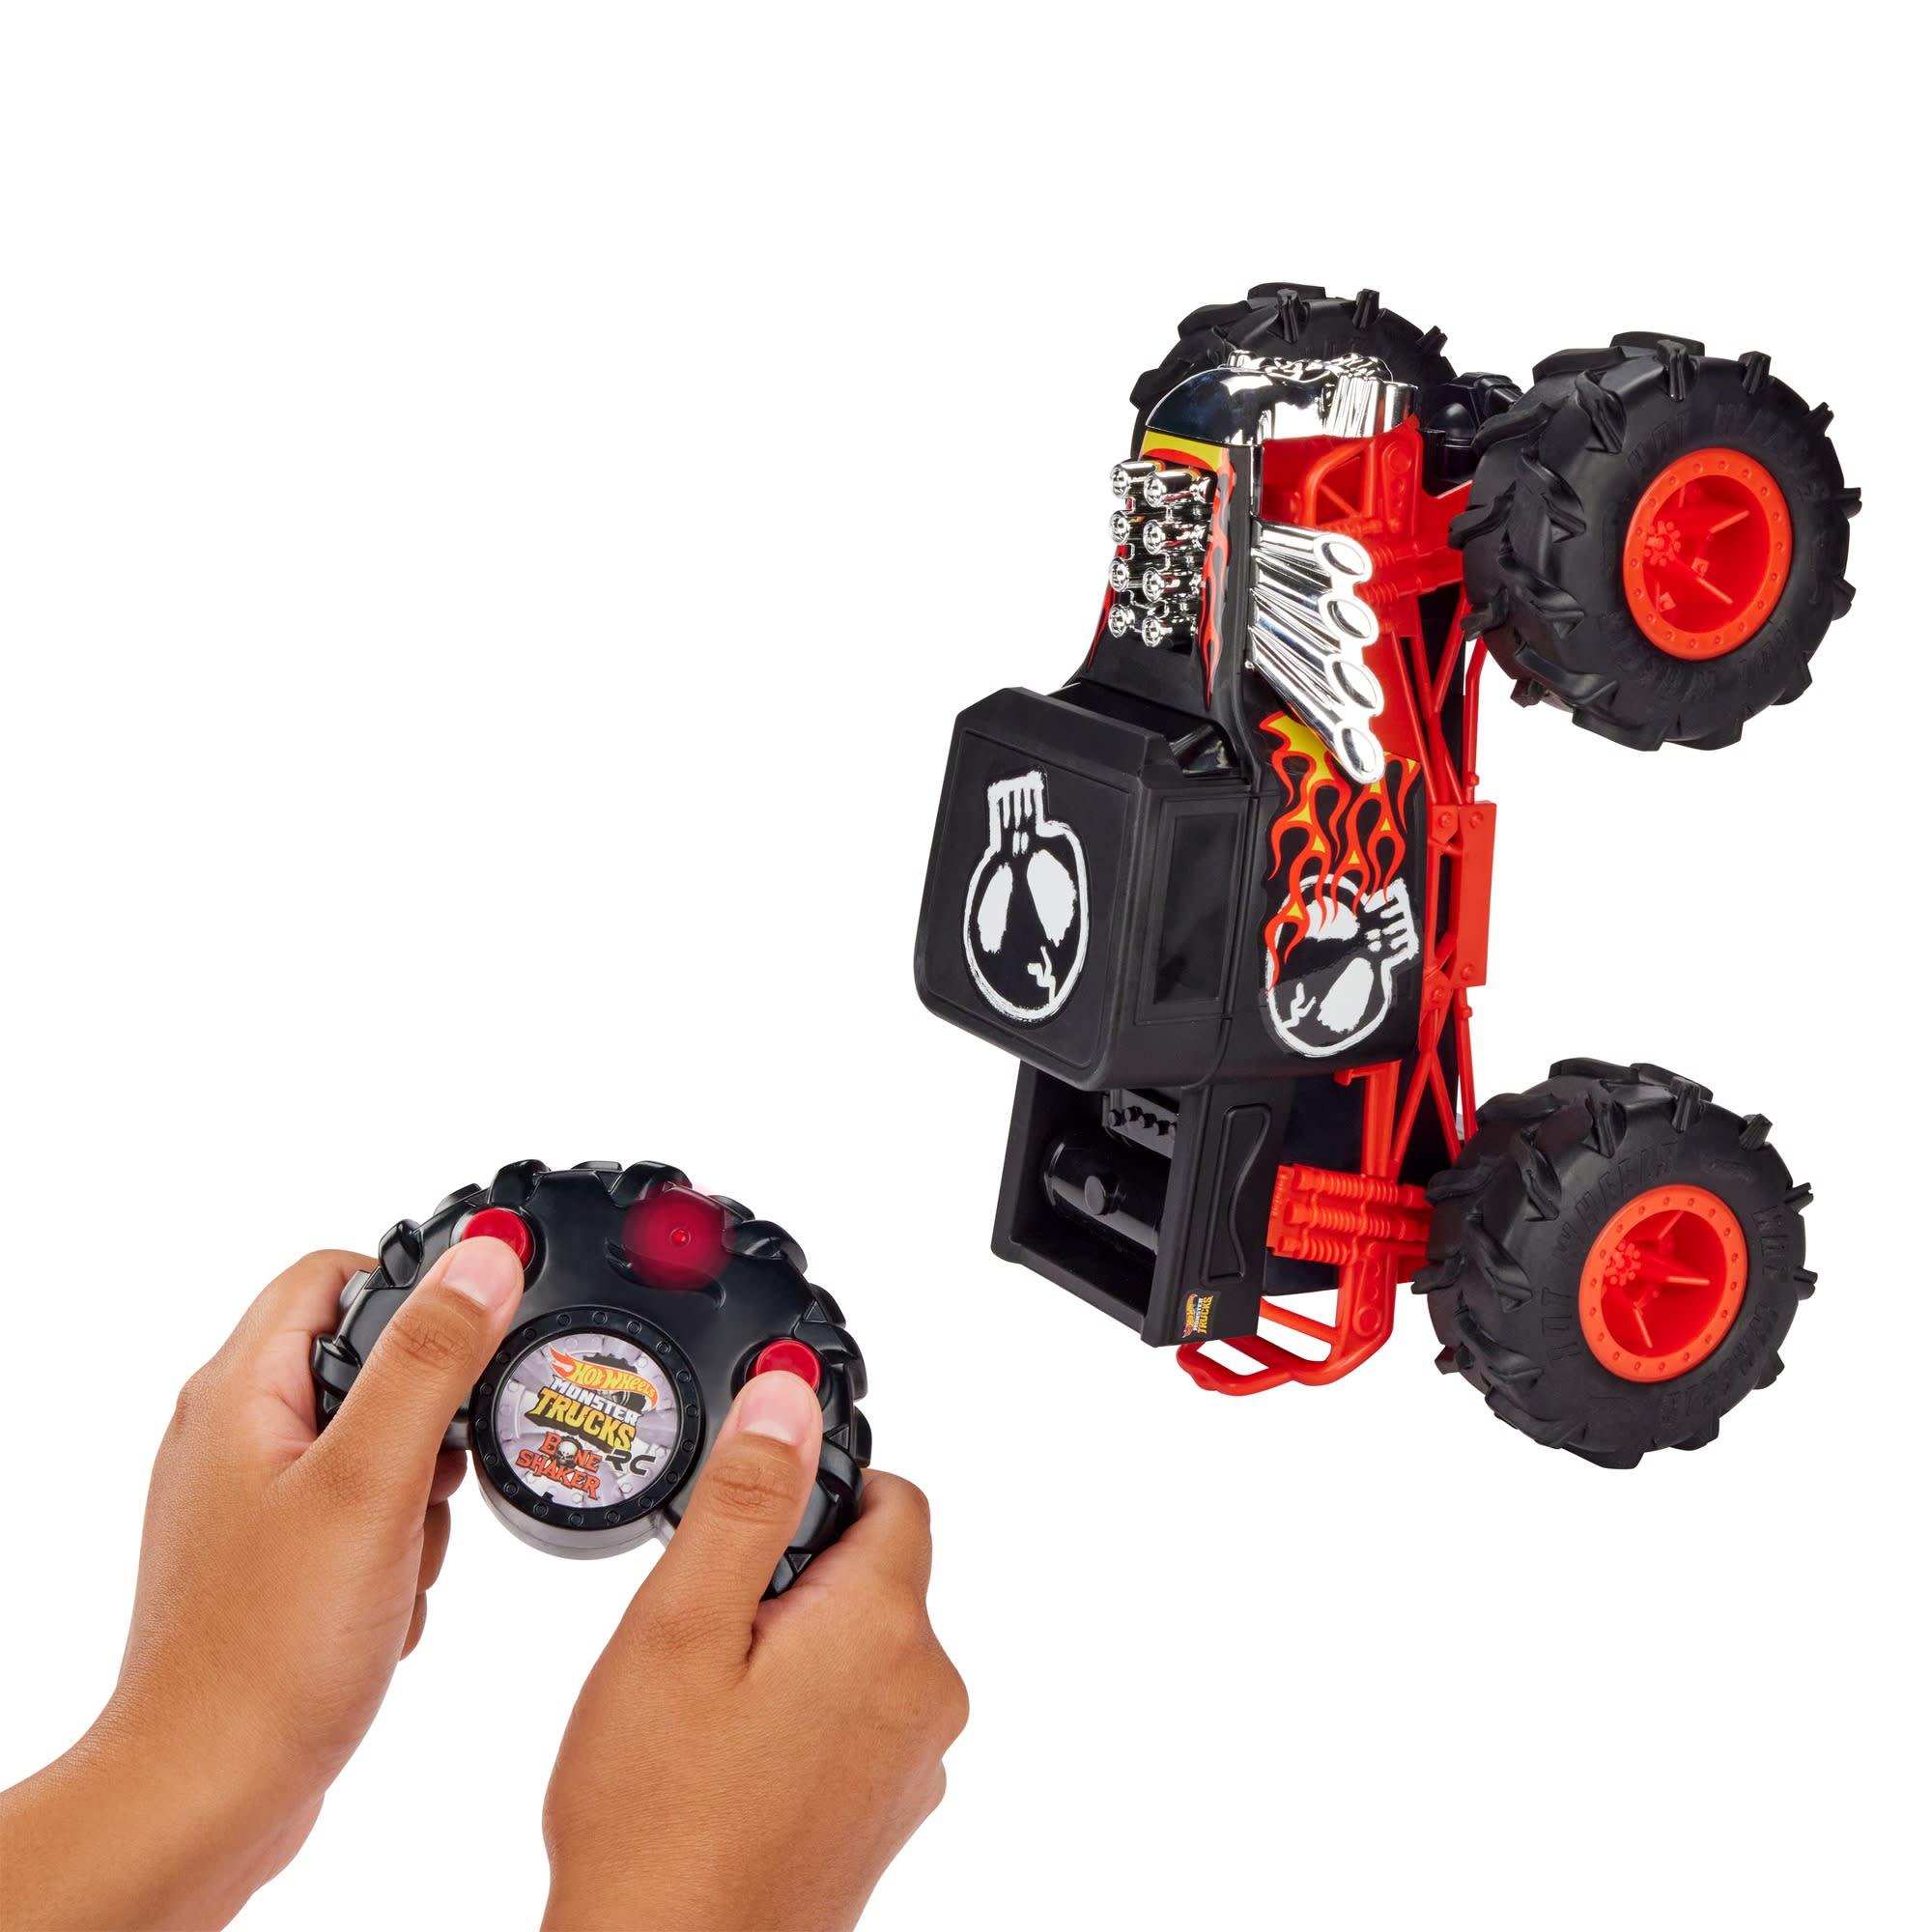 Remote Control Monster Truck Hot Wheels: Safety Measures for Remote Control Monster Truck Hot Wheels